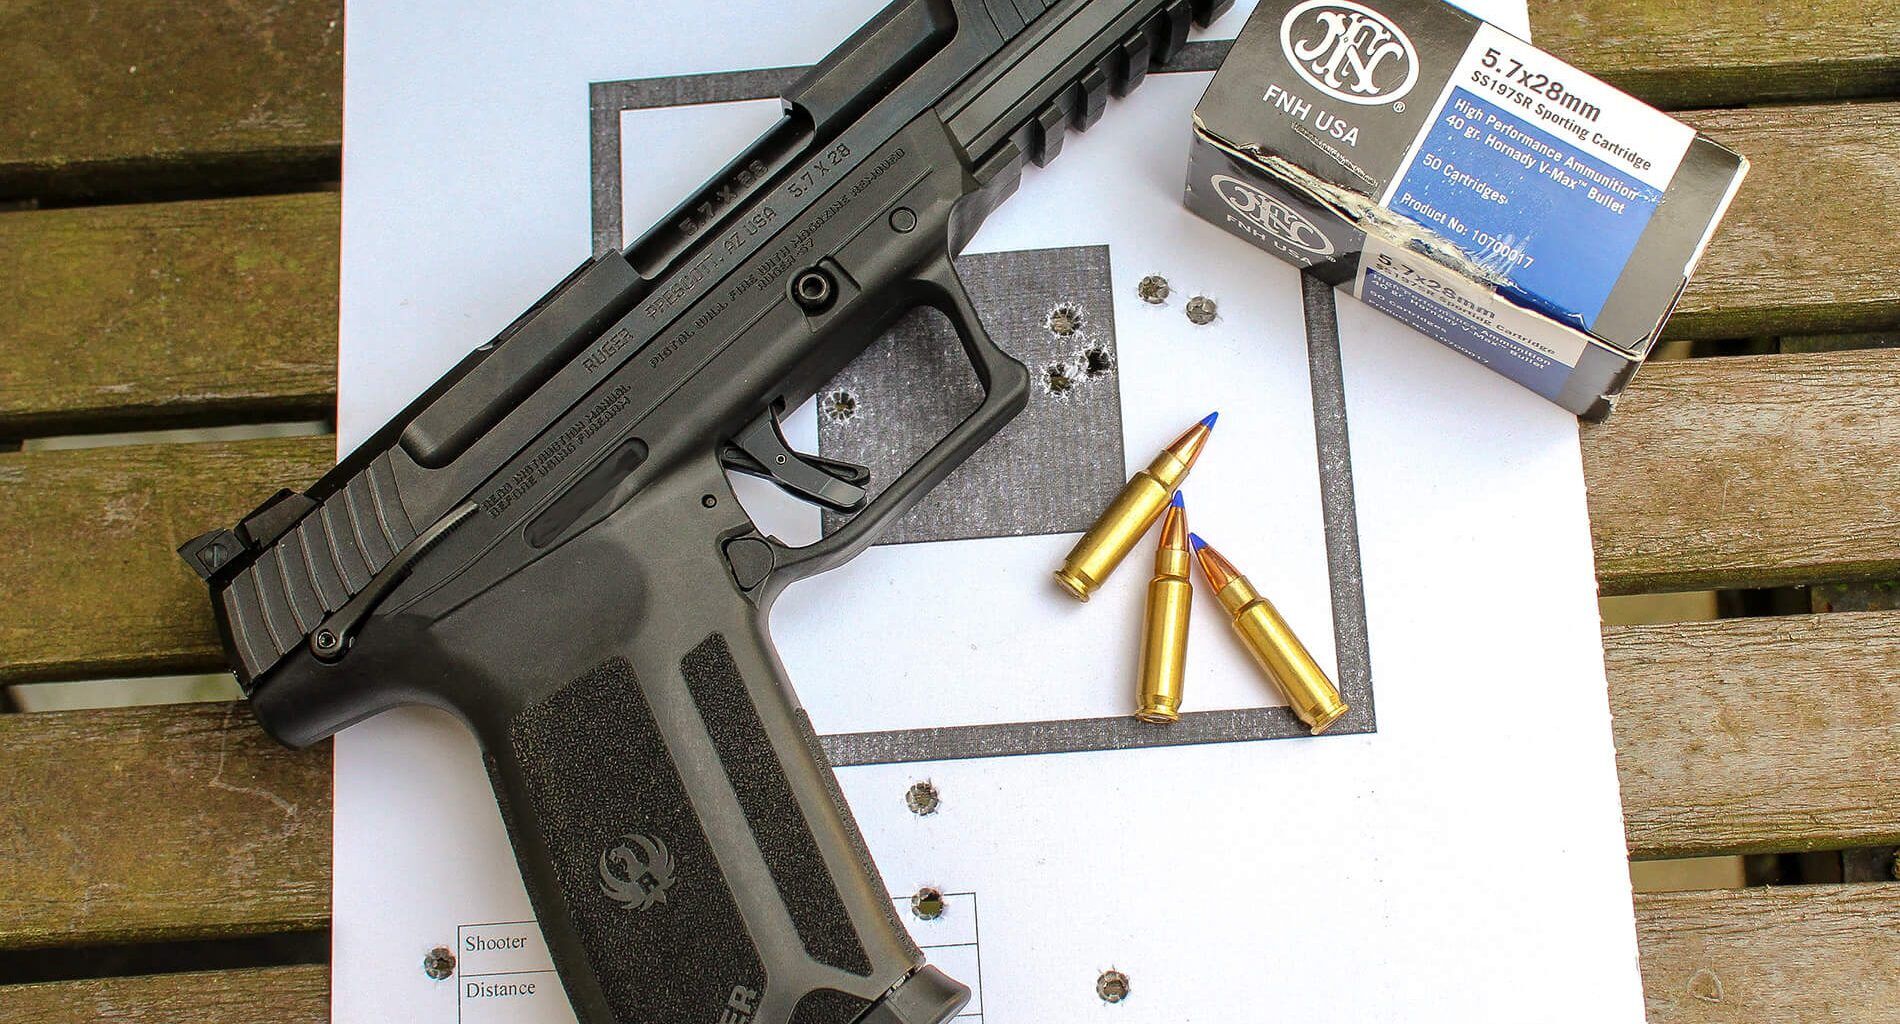 Affordable Handgun Ammo: Is It Up to Par for Your Firearms Use